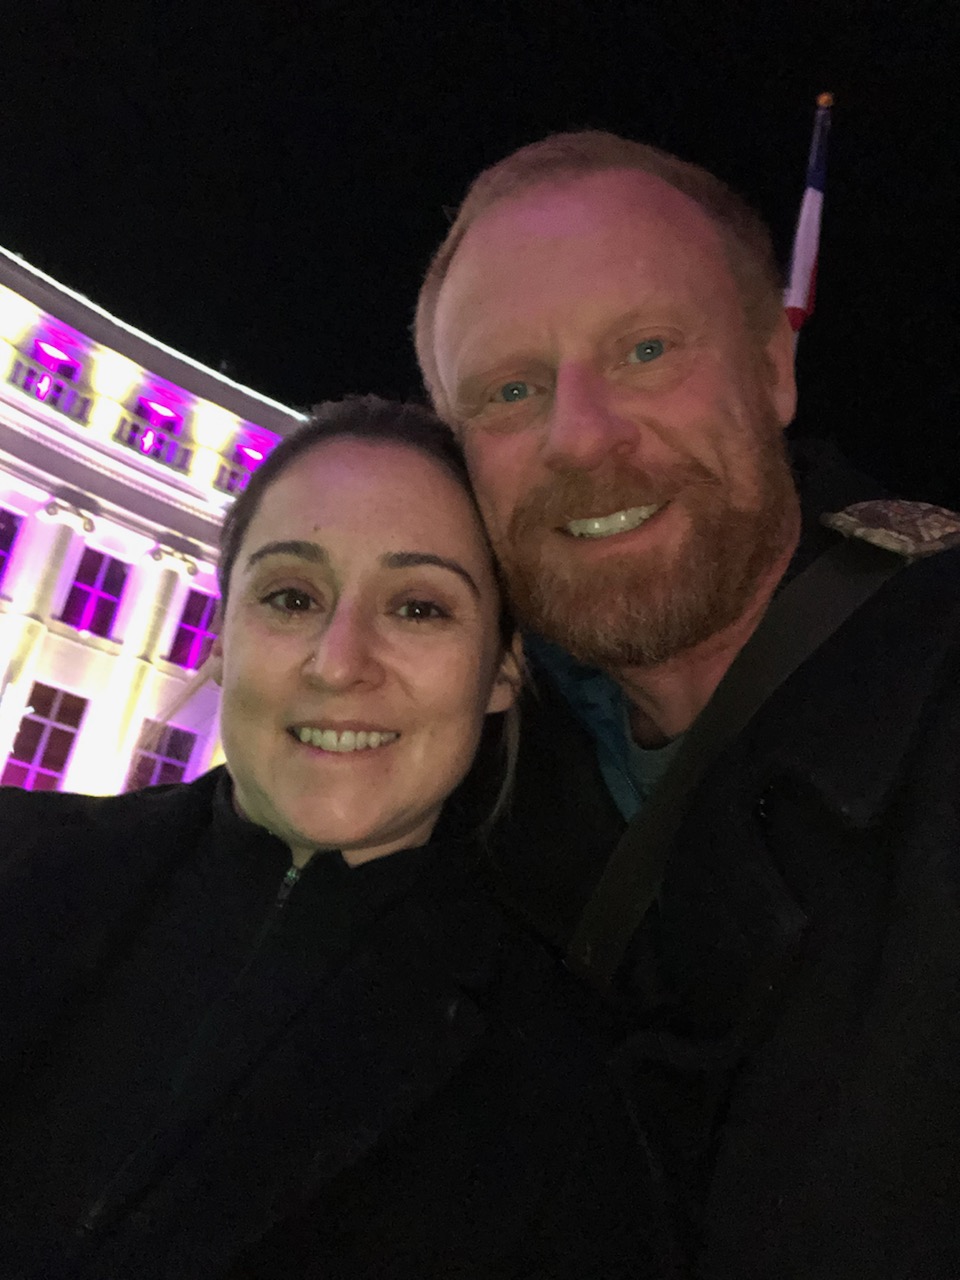 Angie and Kevin Hento in front of a White House with purple lights